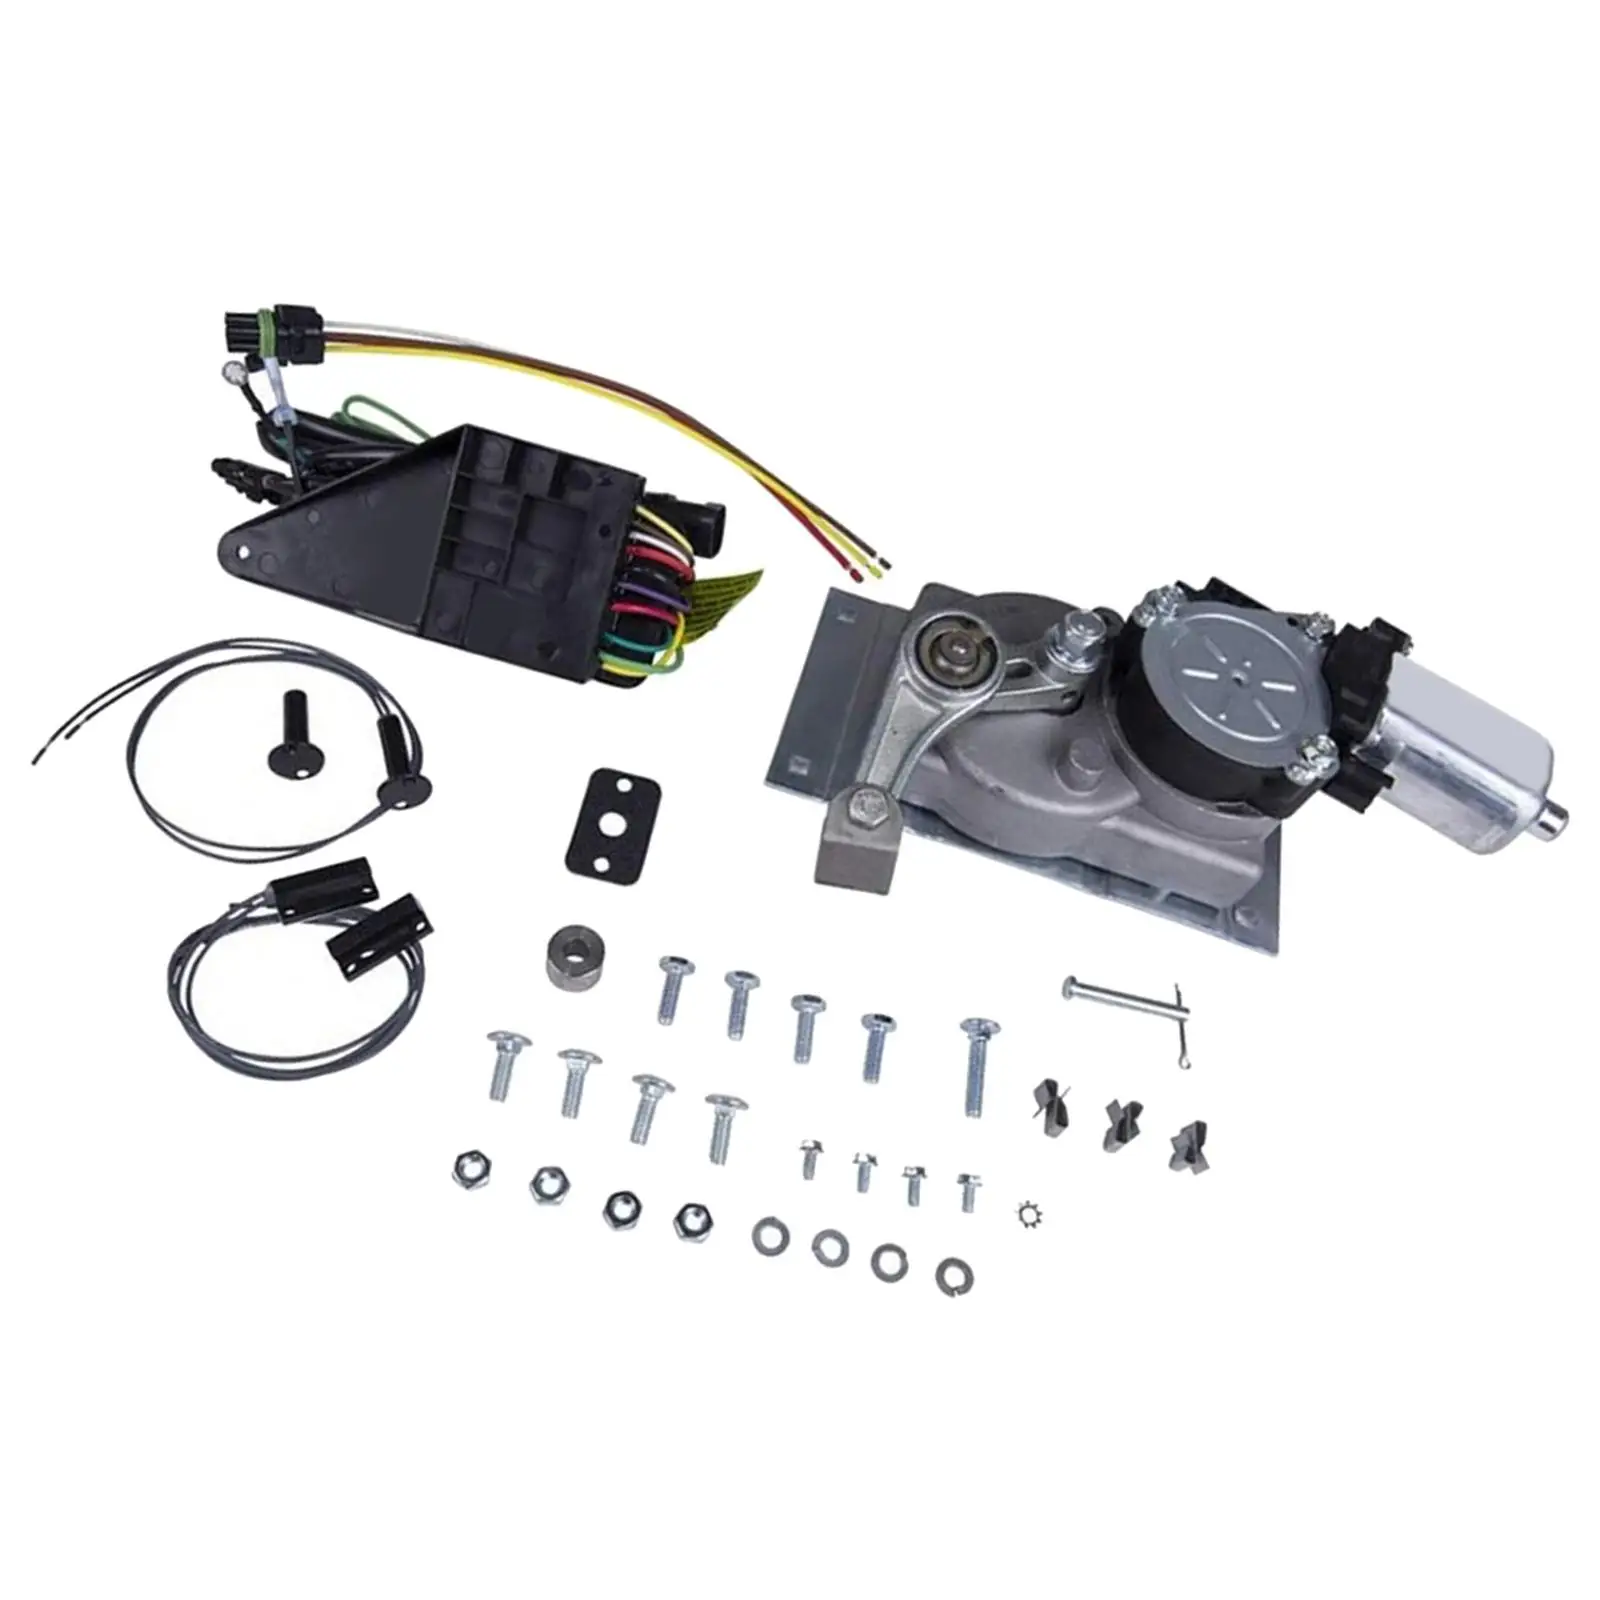 RV Step Motor Replacement Motor Conversion Kit for Motorhomes Rvs Truck